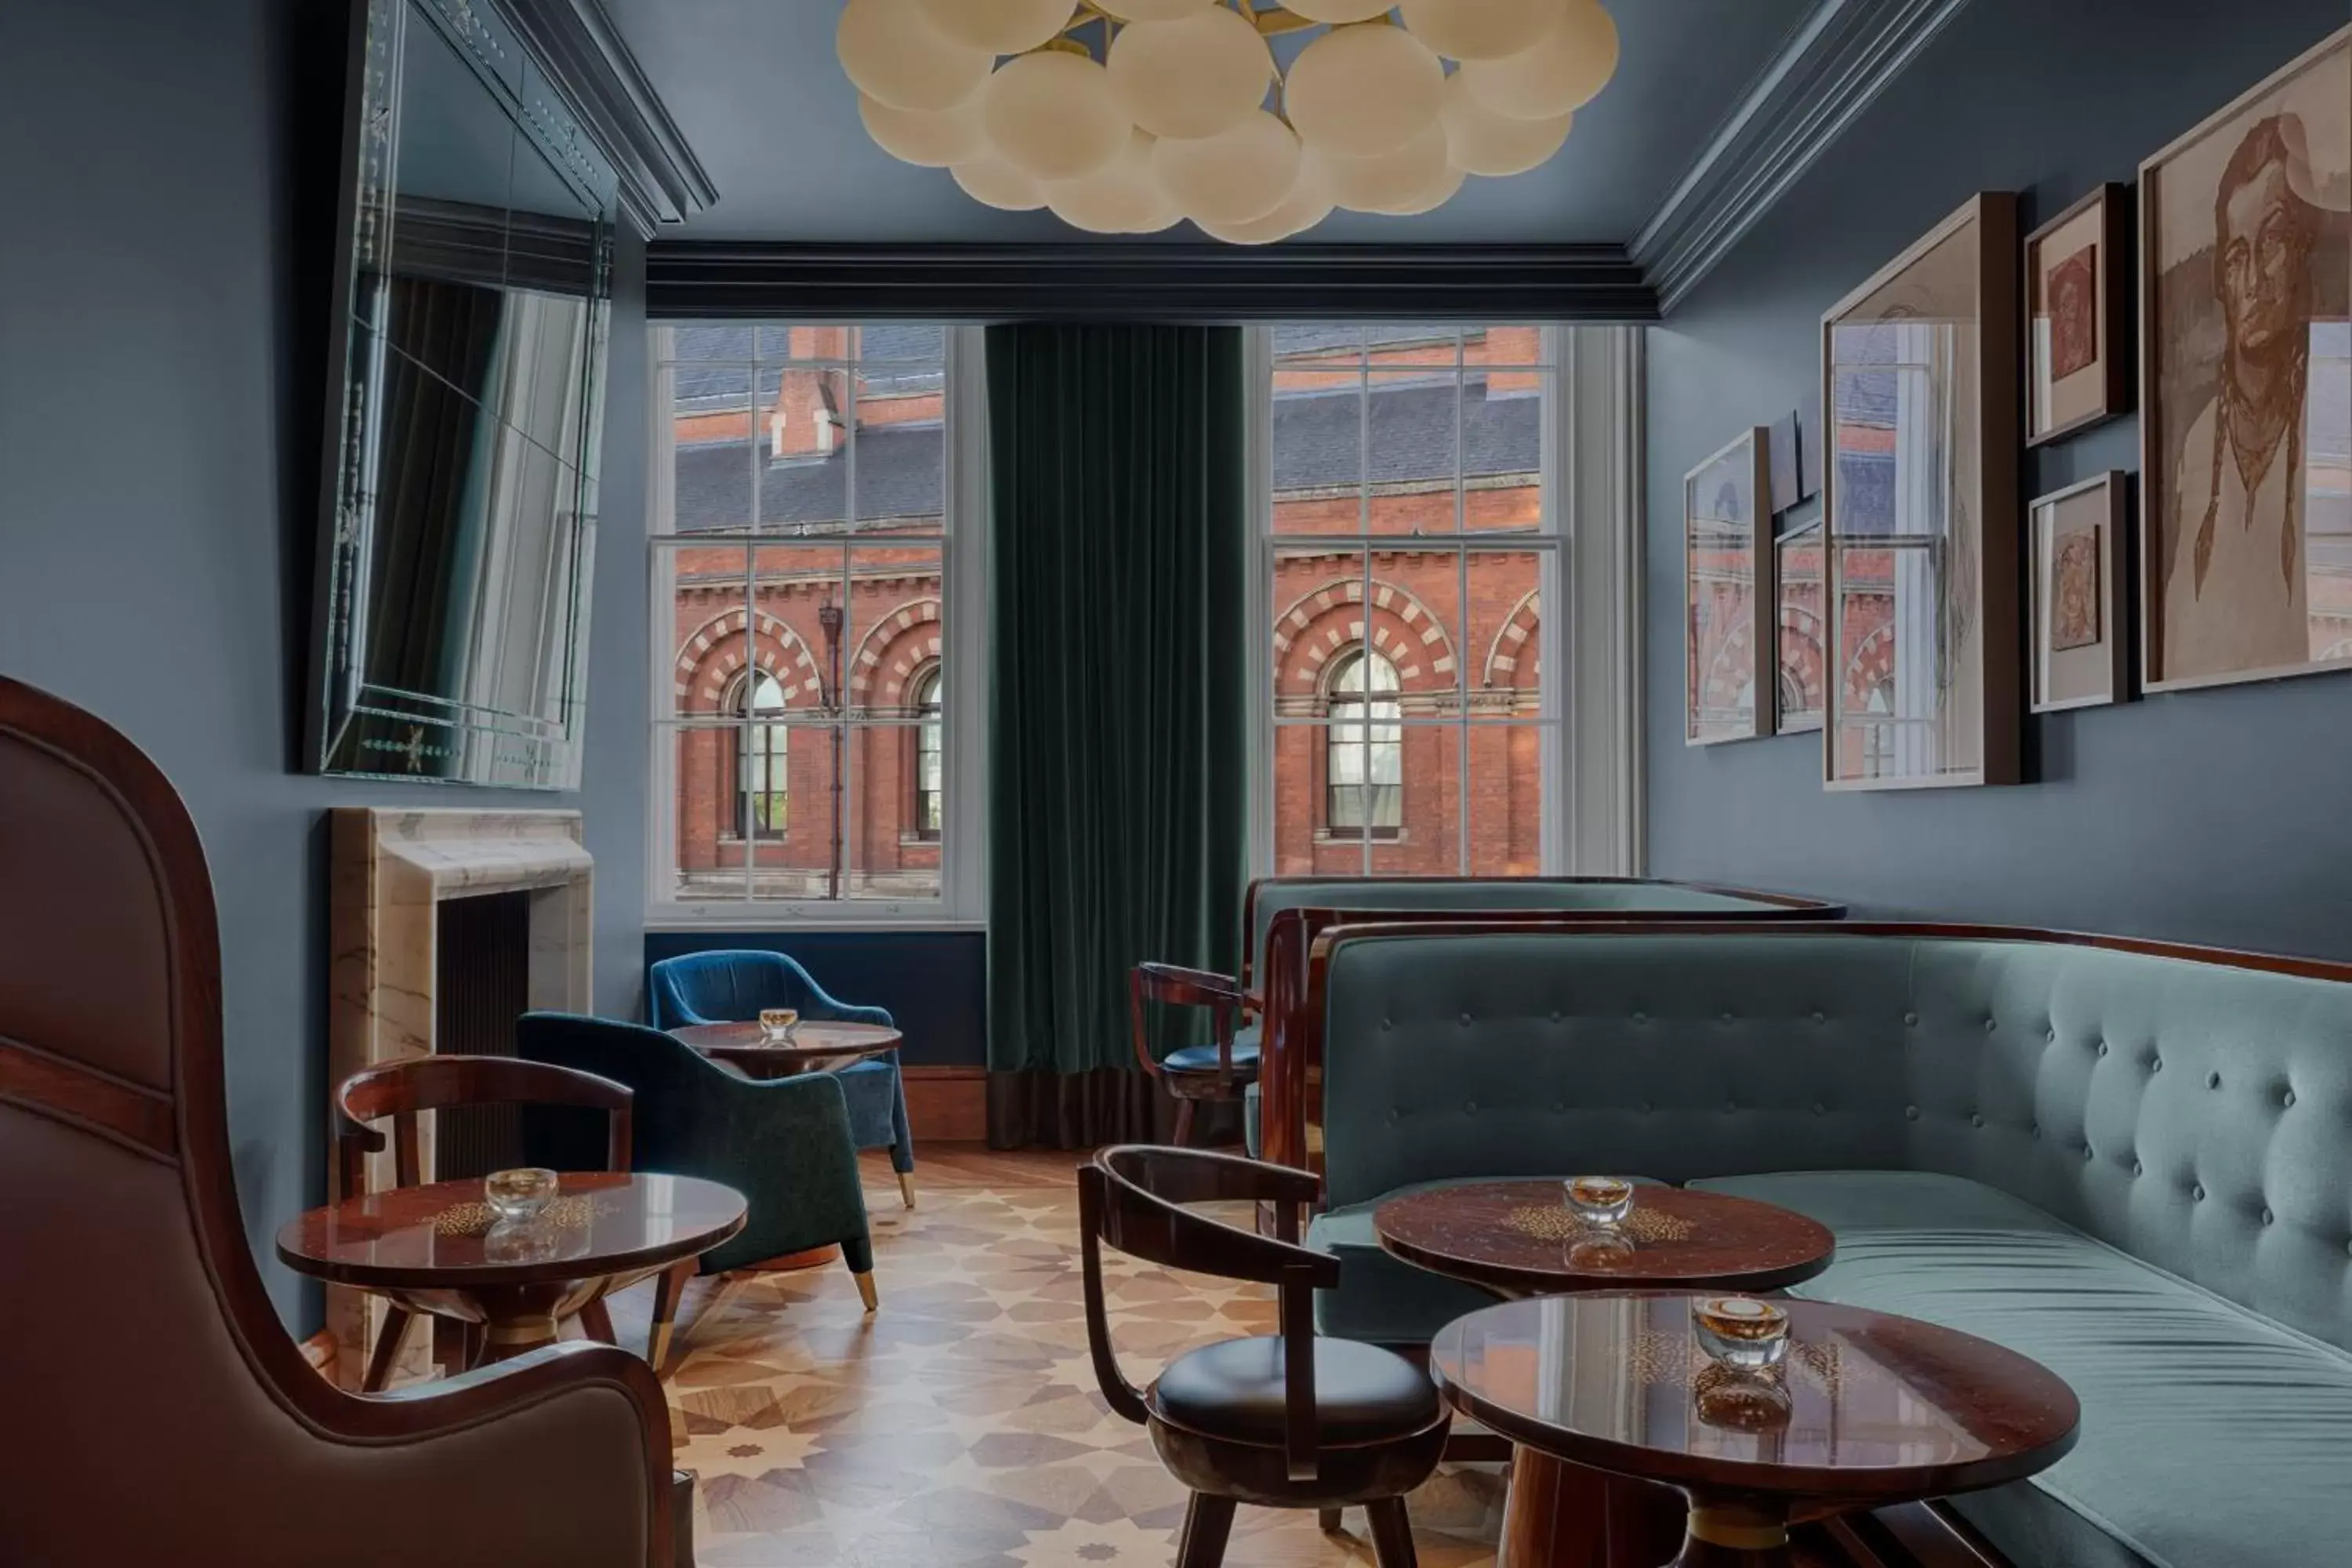 Lounge or bar, Seating Area in Great Northern Hotel, A Tribute Portfolio Hotel, London